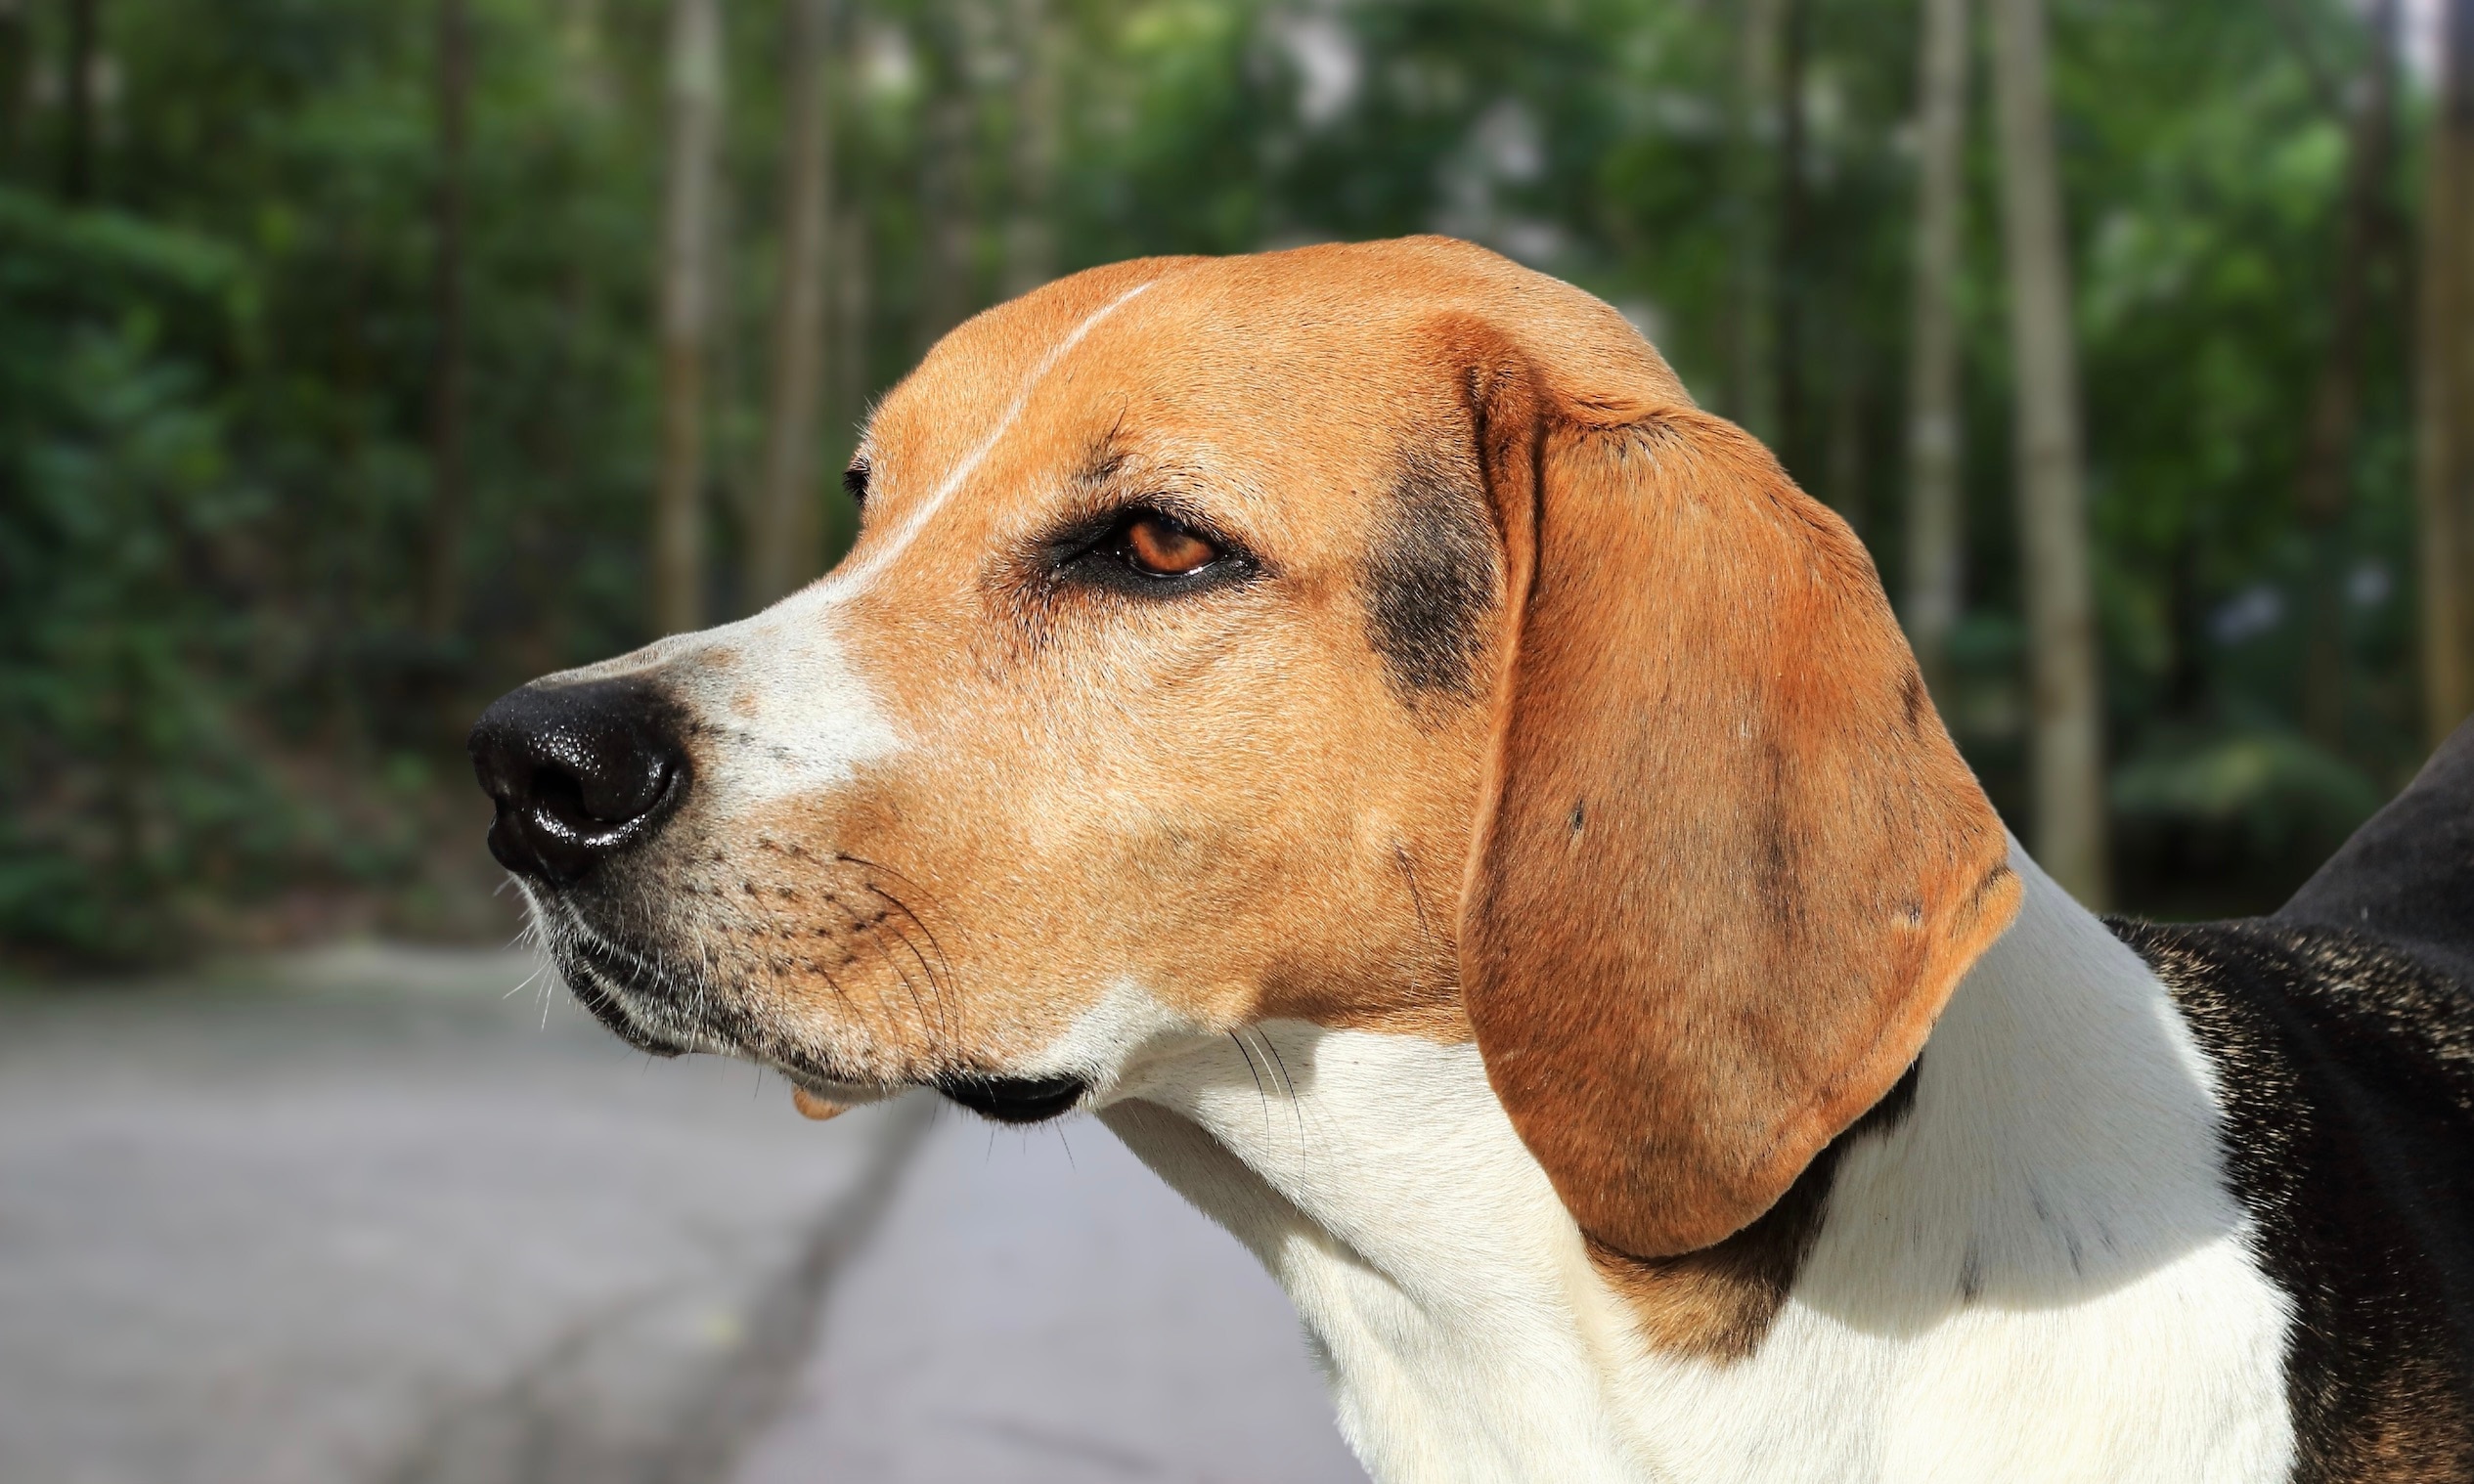 30 Hound Dog Breeds Every Dog-Lover Should Know